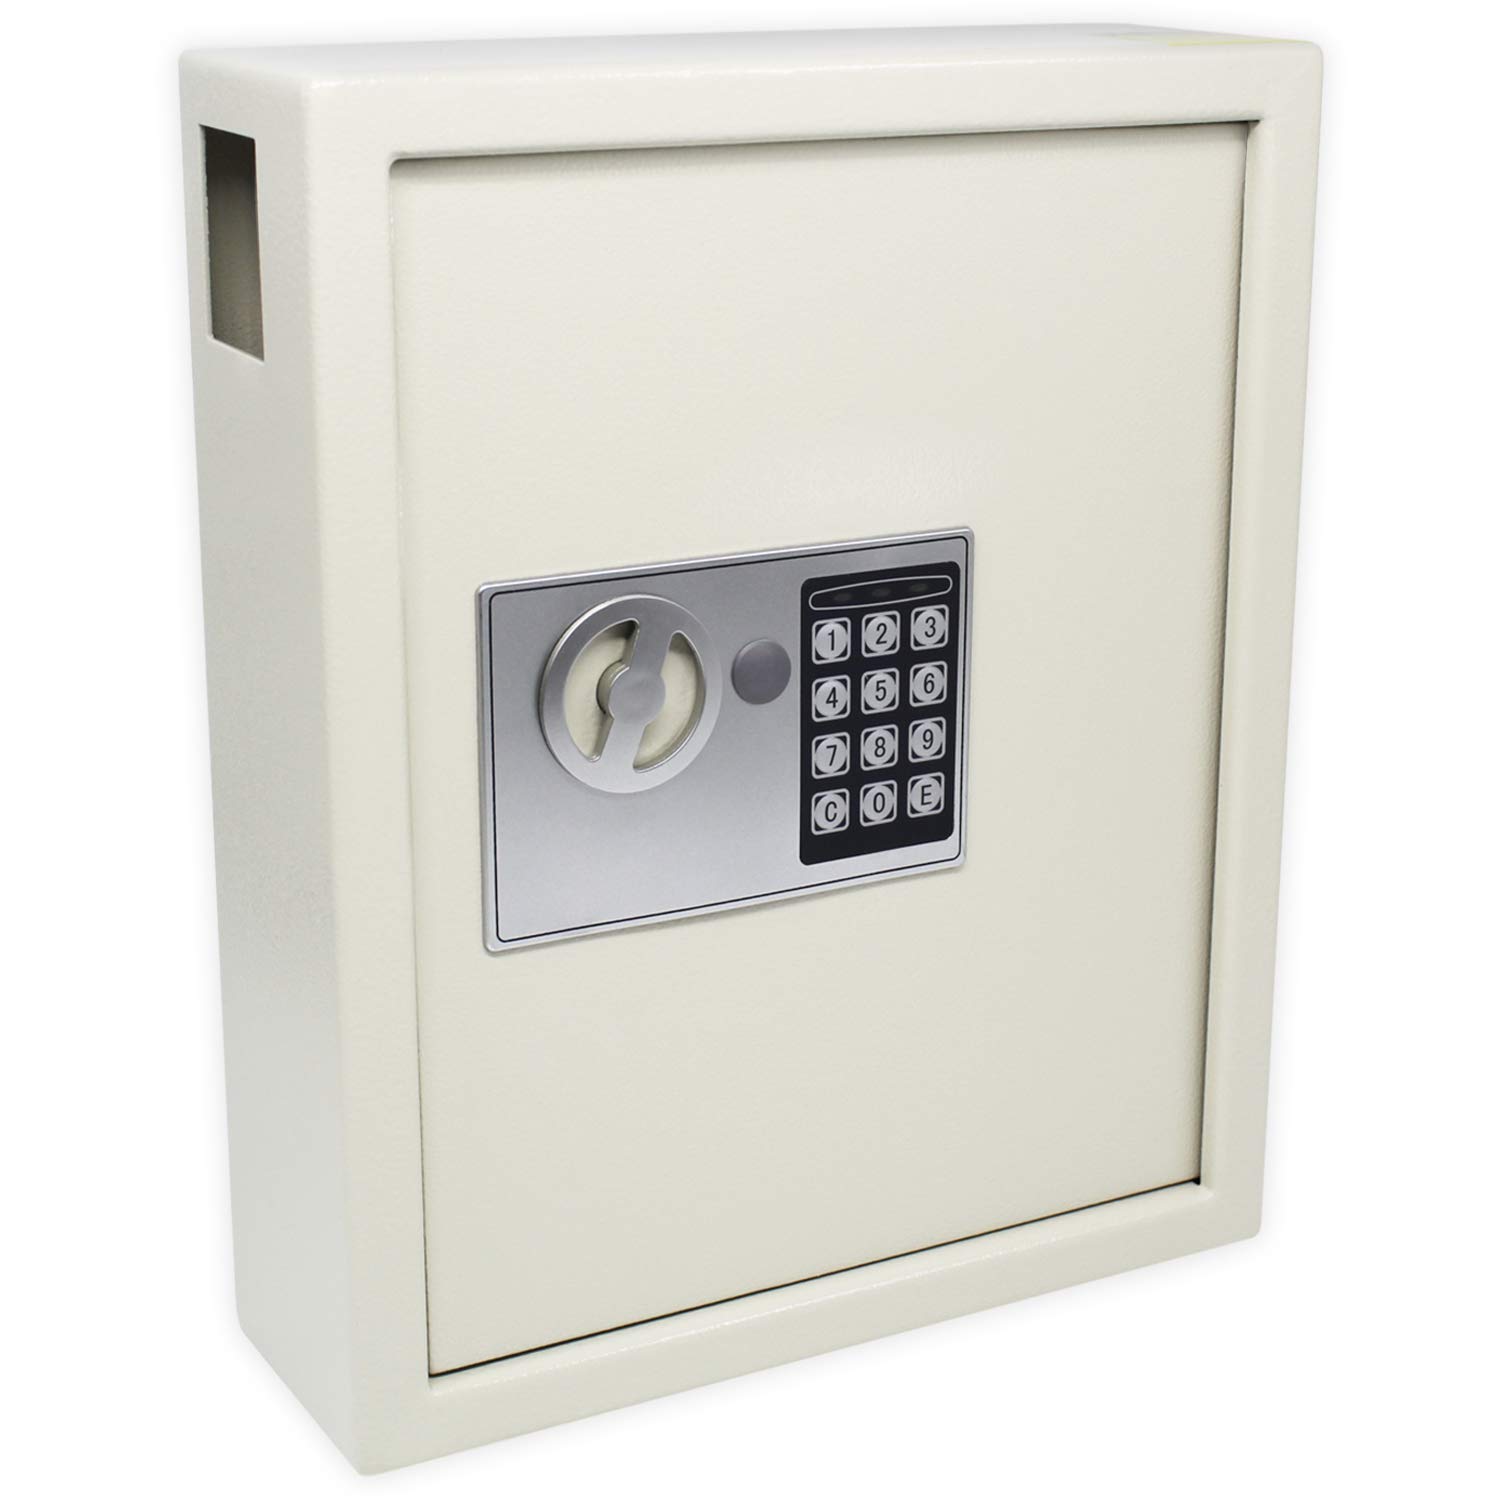 A safe with a combination lock